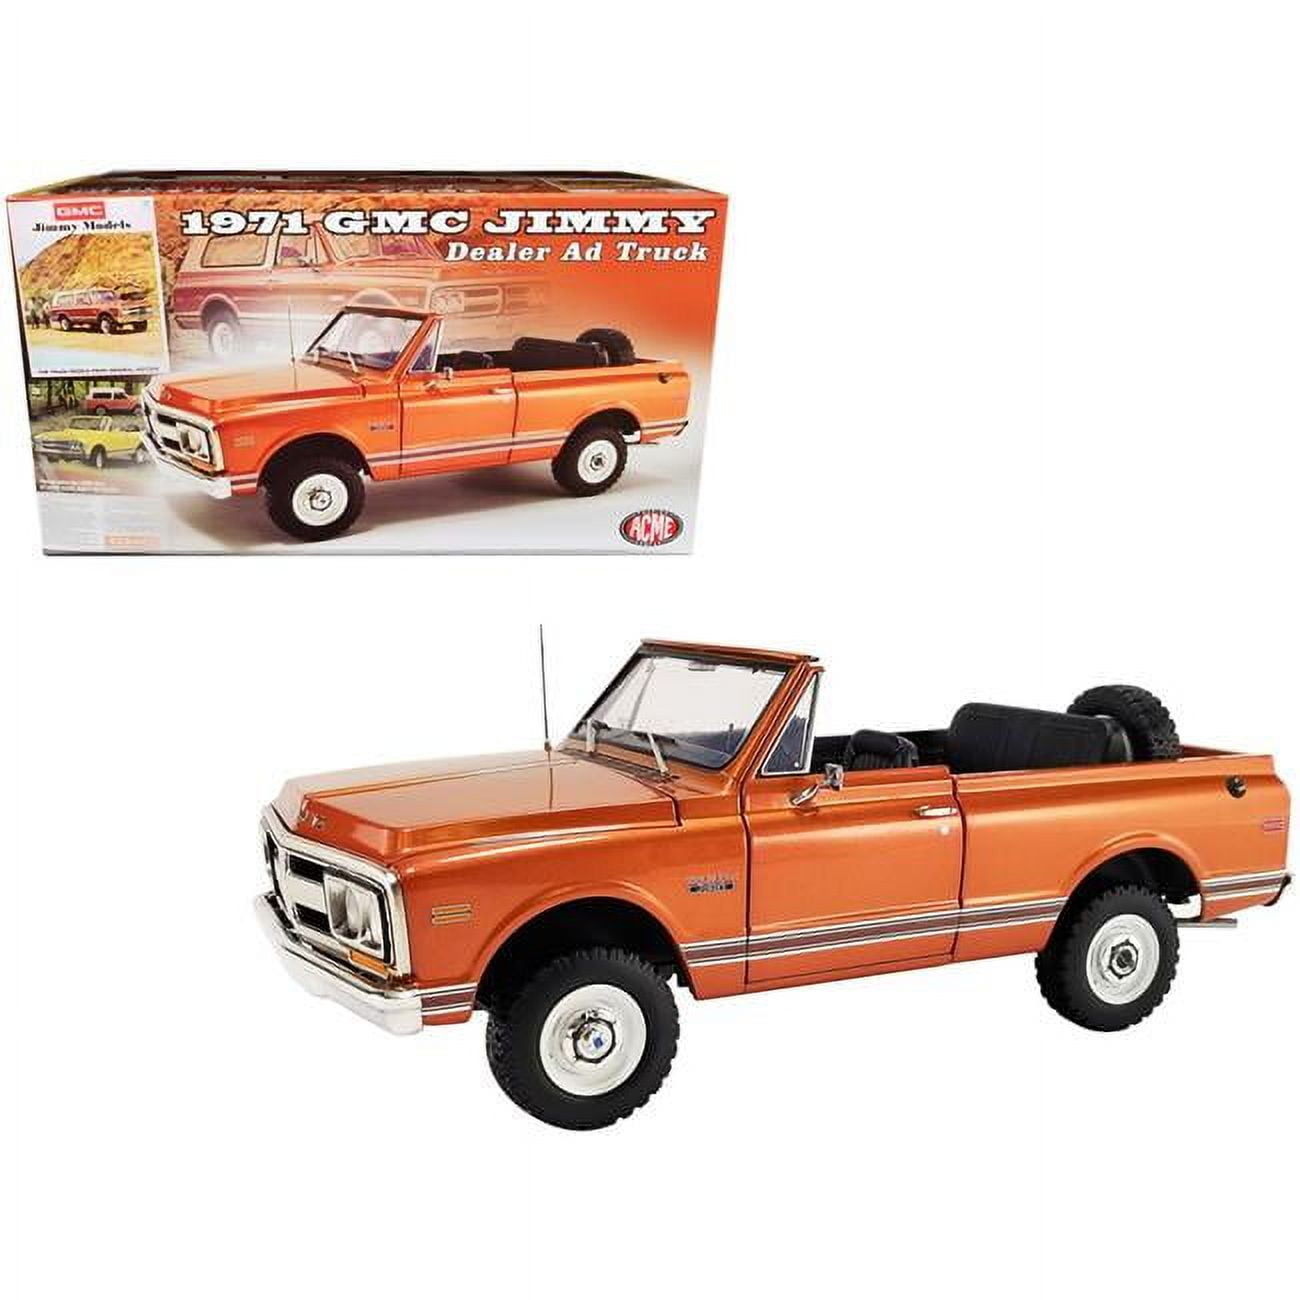 Picture of Acme A1807710 1971 GMC Jimmy Metallic Top Dealer Ad Truck Limited Edition 1-18 Diecast Model Car&#44; Orange & White